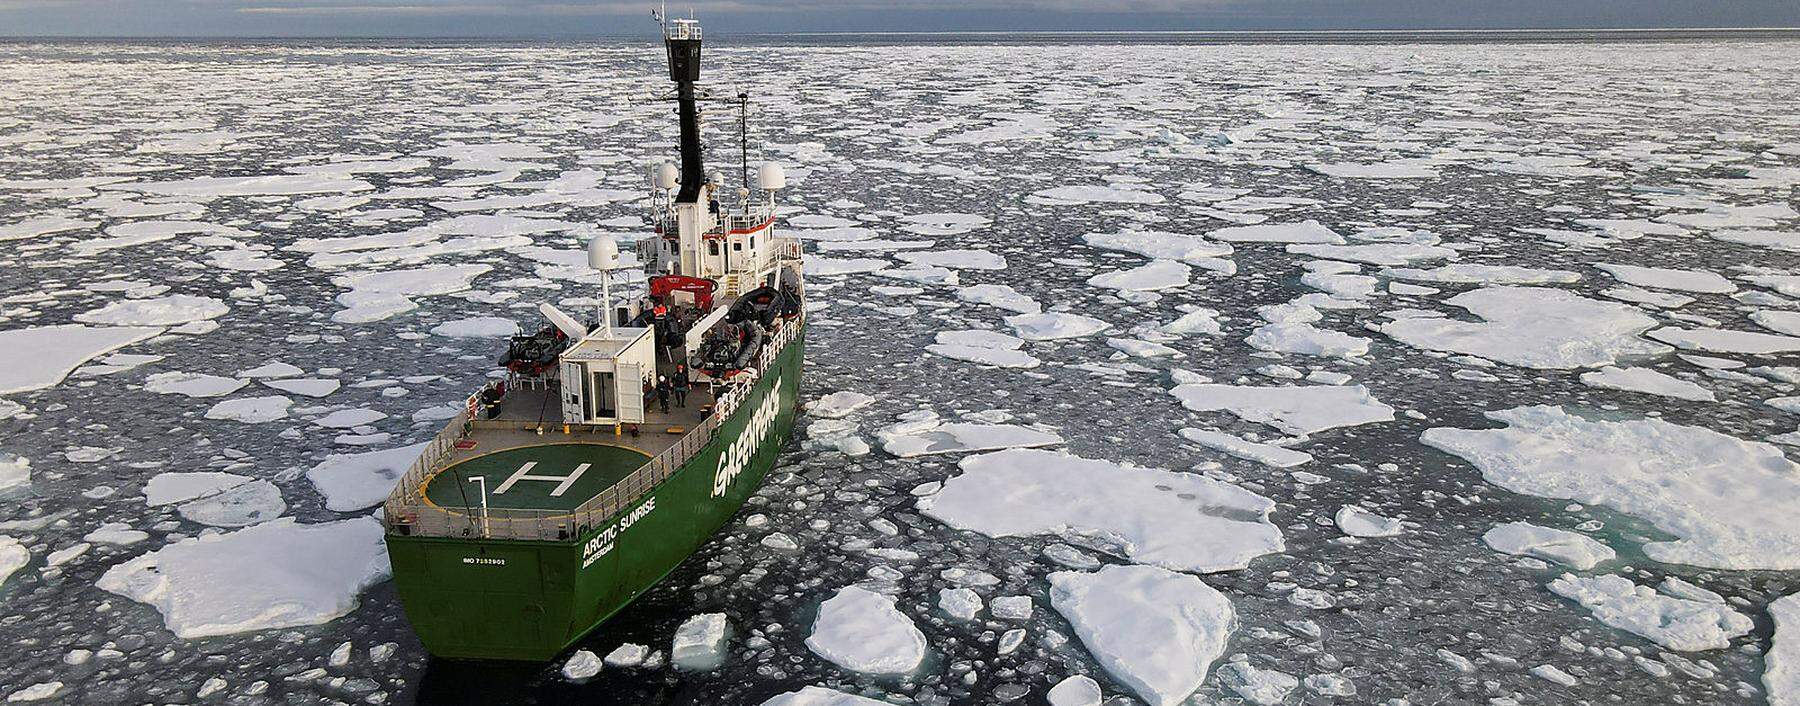 FILE PHOTO: Greenpeace's Arctic Sunrise ship navigates through floating ice in the Arctic Ocean